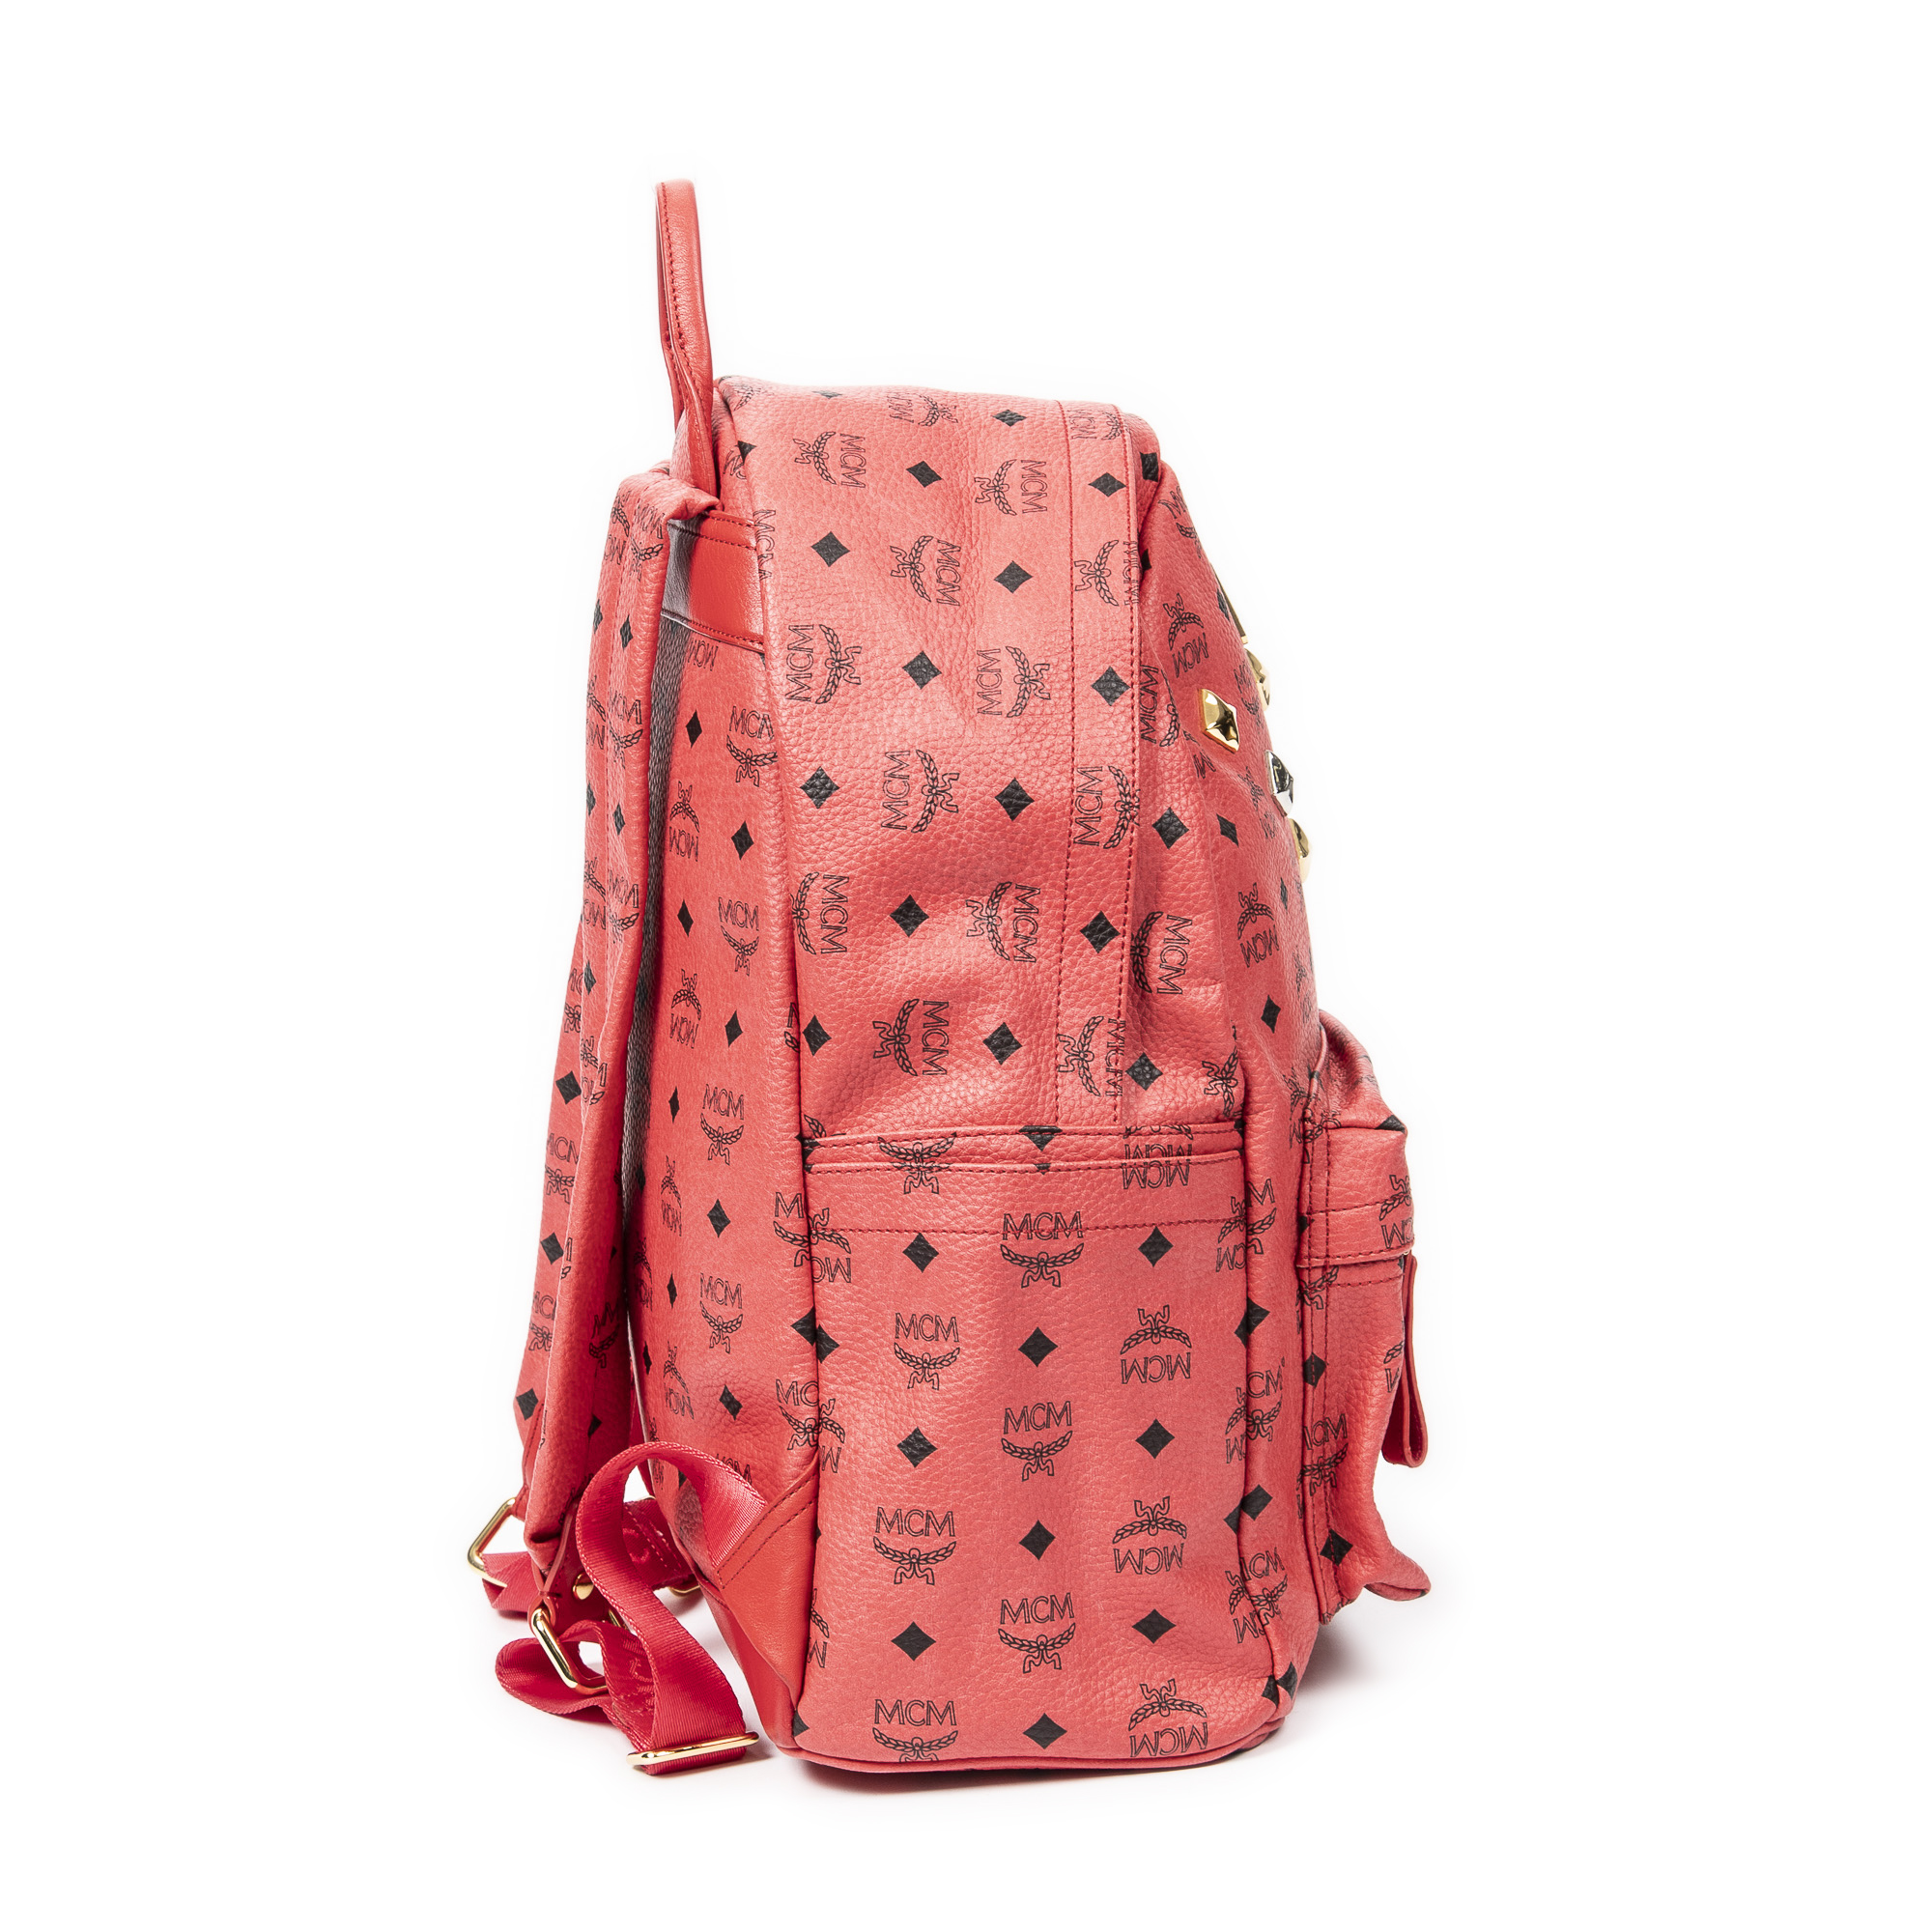 MCM Backpack with logo, Women's Bags